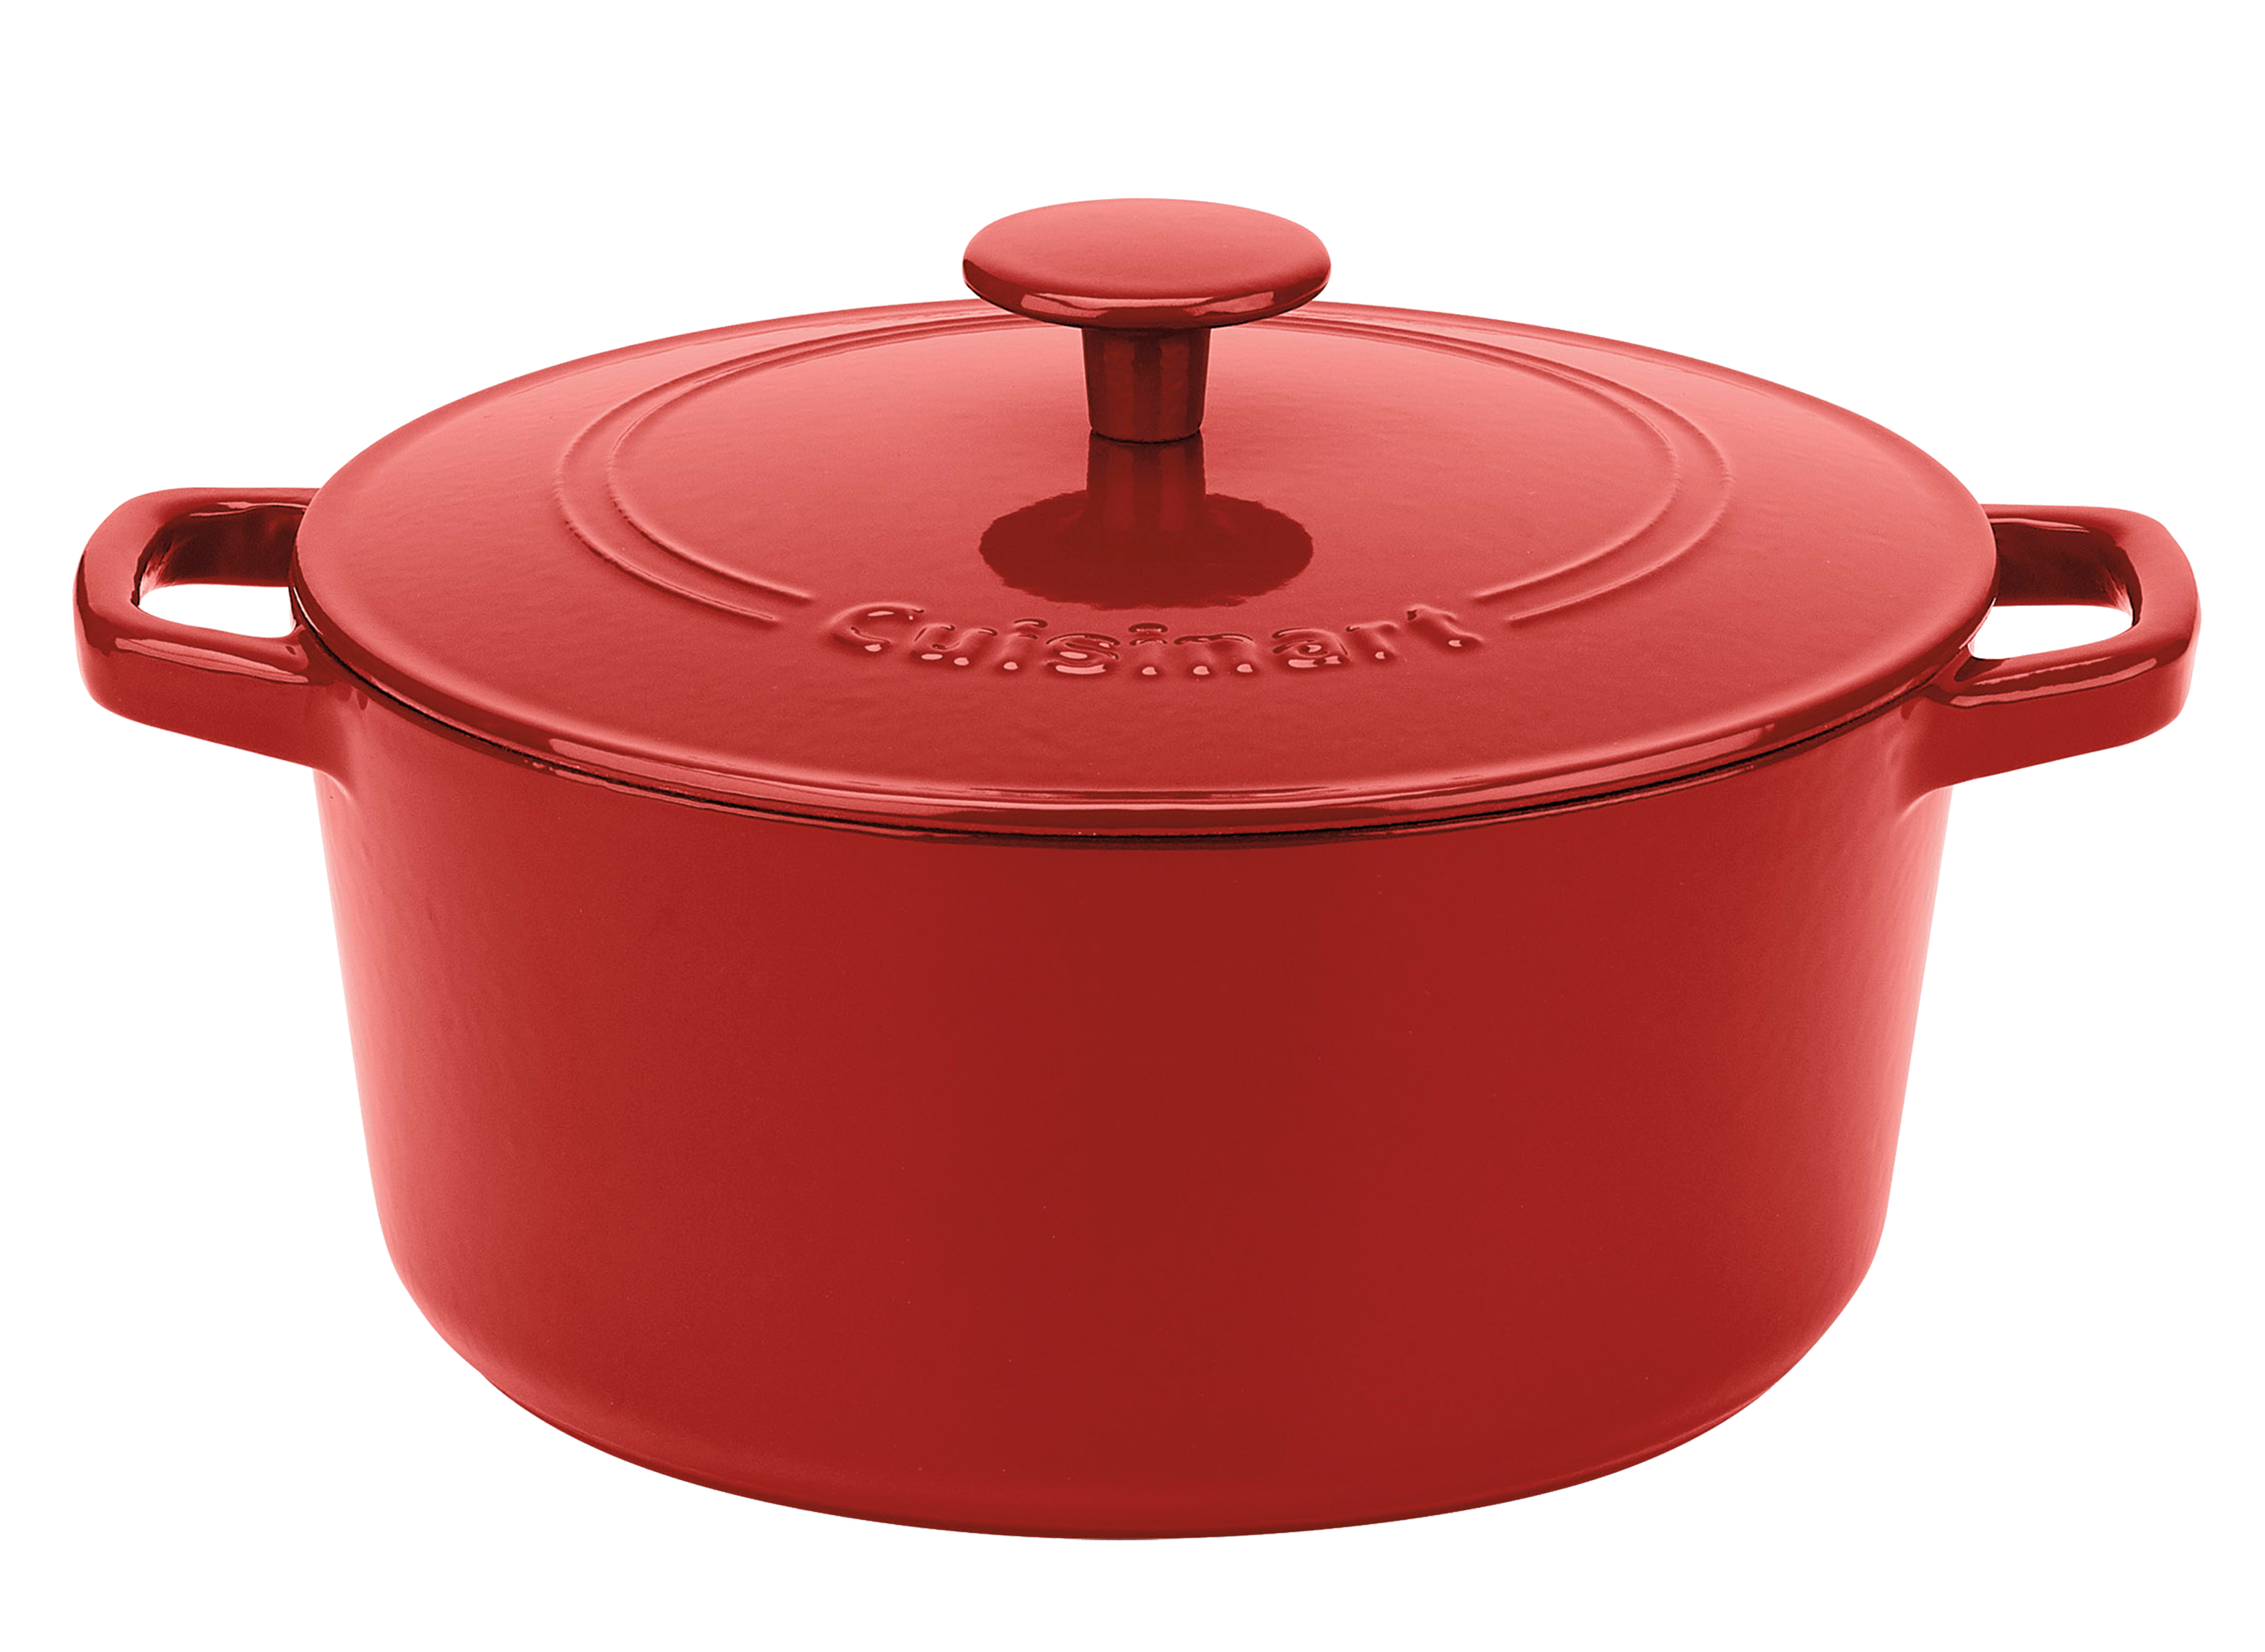 Are Cuisinart Dutch Ovens Any Good? (In-Depth Review) - Prudent Reviews